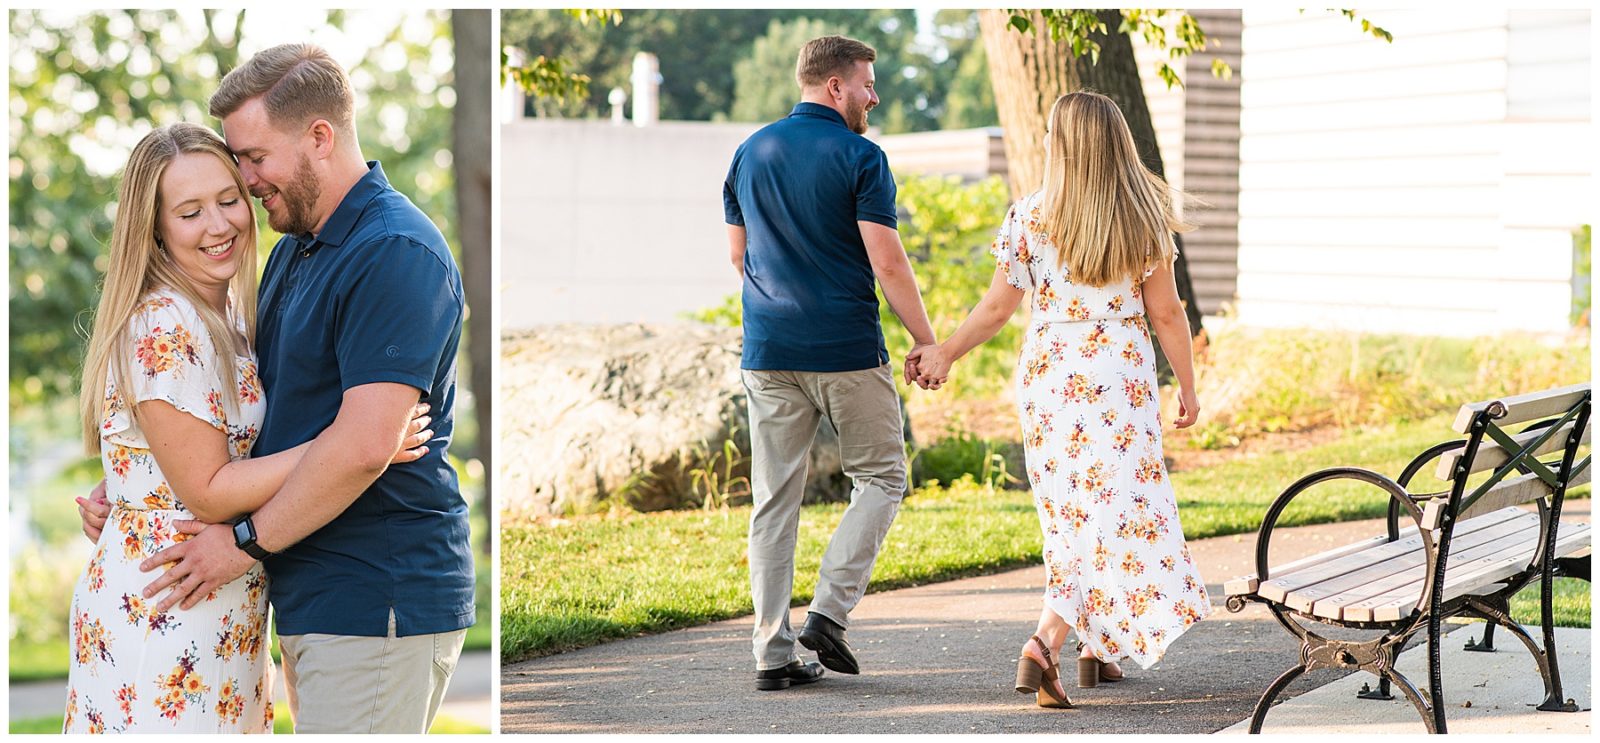 A Cleveland engagement session, wade lagoon photos, summer photos, sweet and candid photos, romantic engagement photos, outfit ideas, soft floral dress